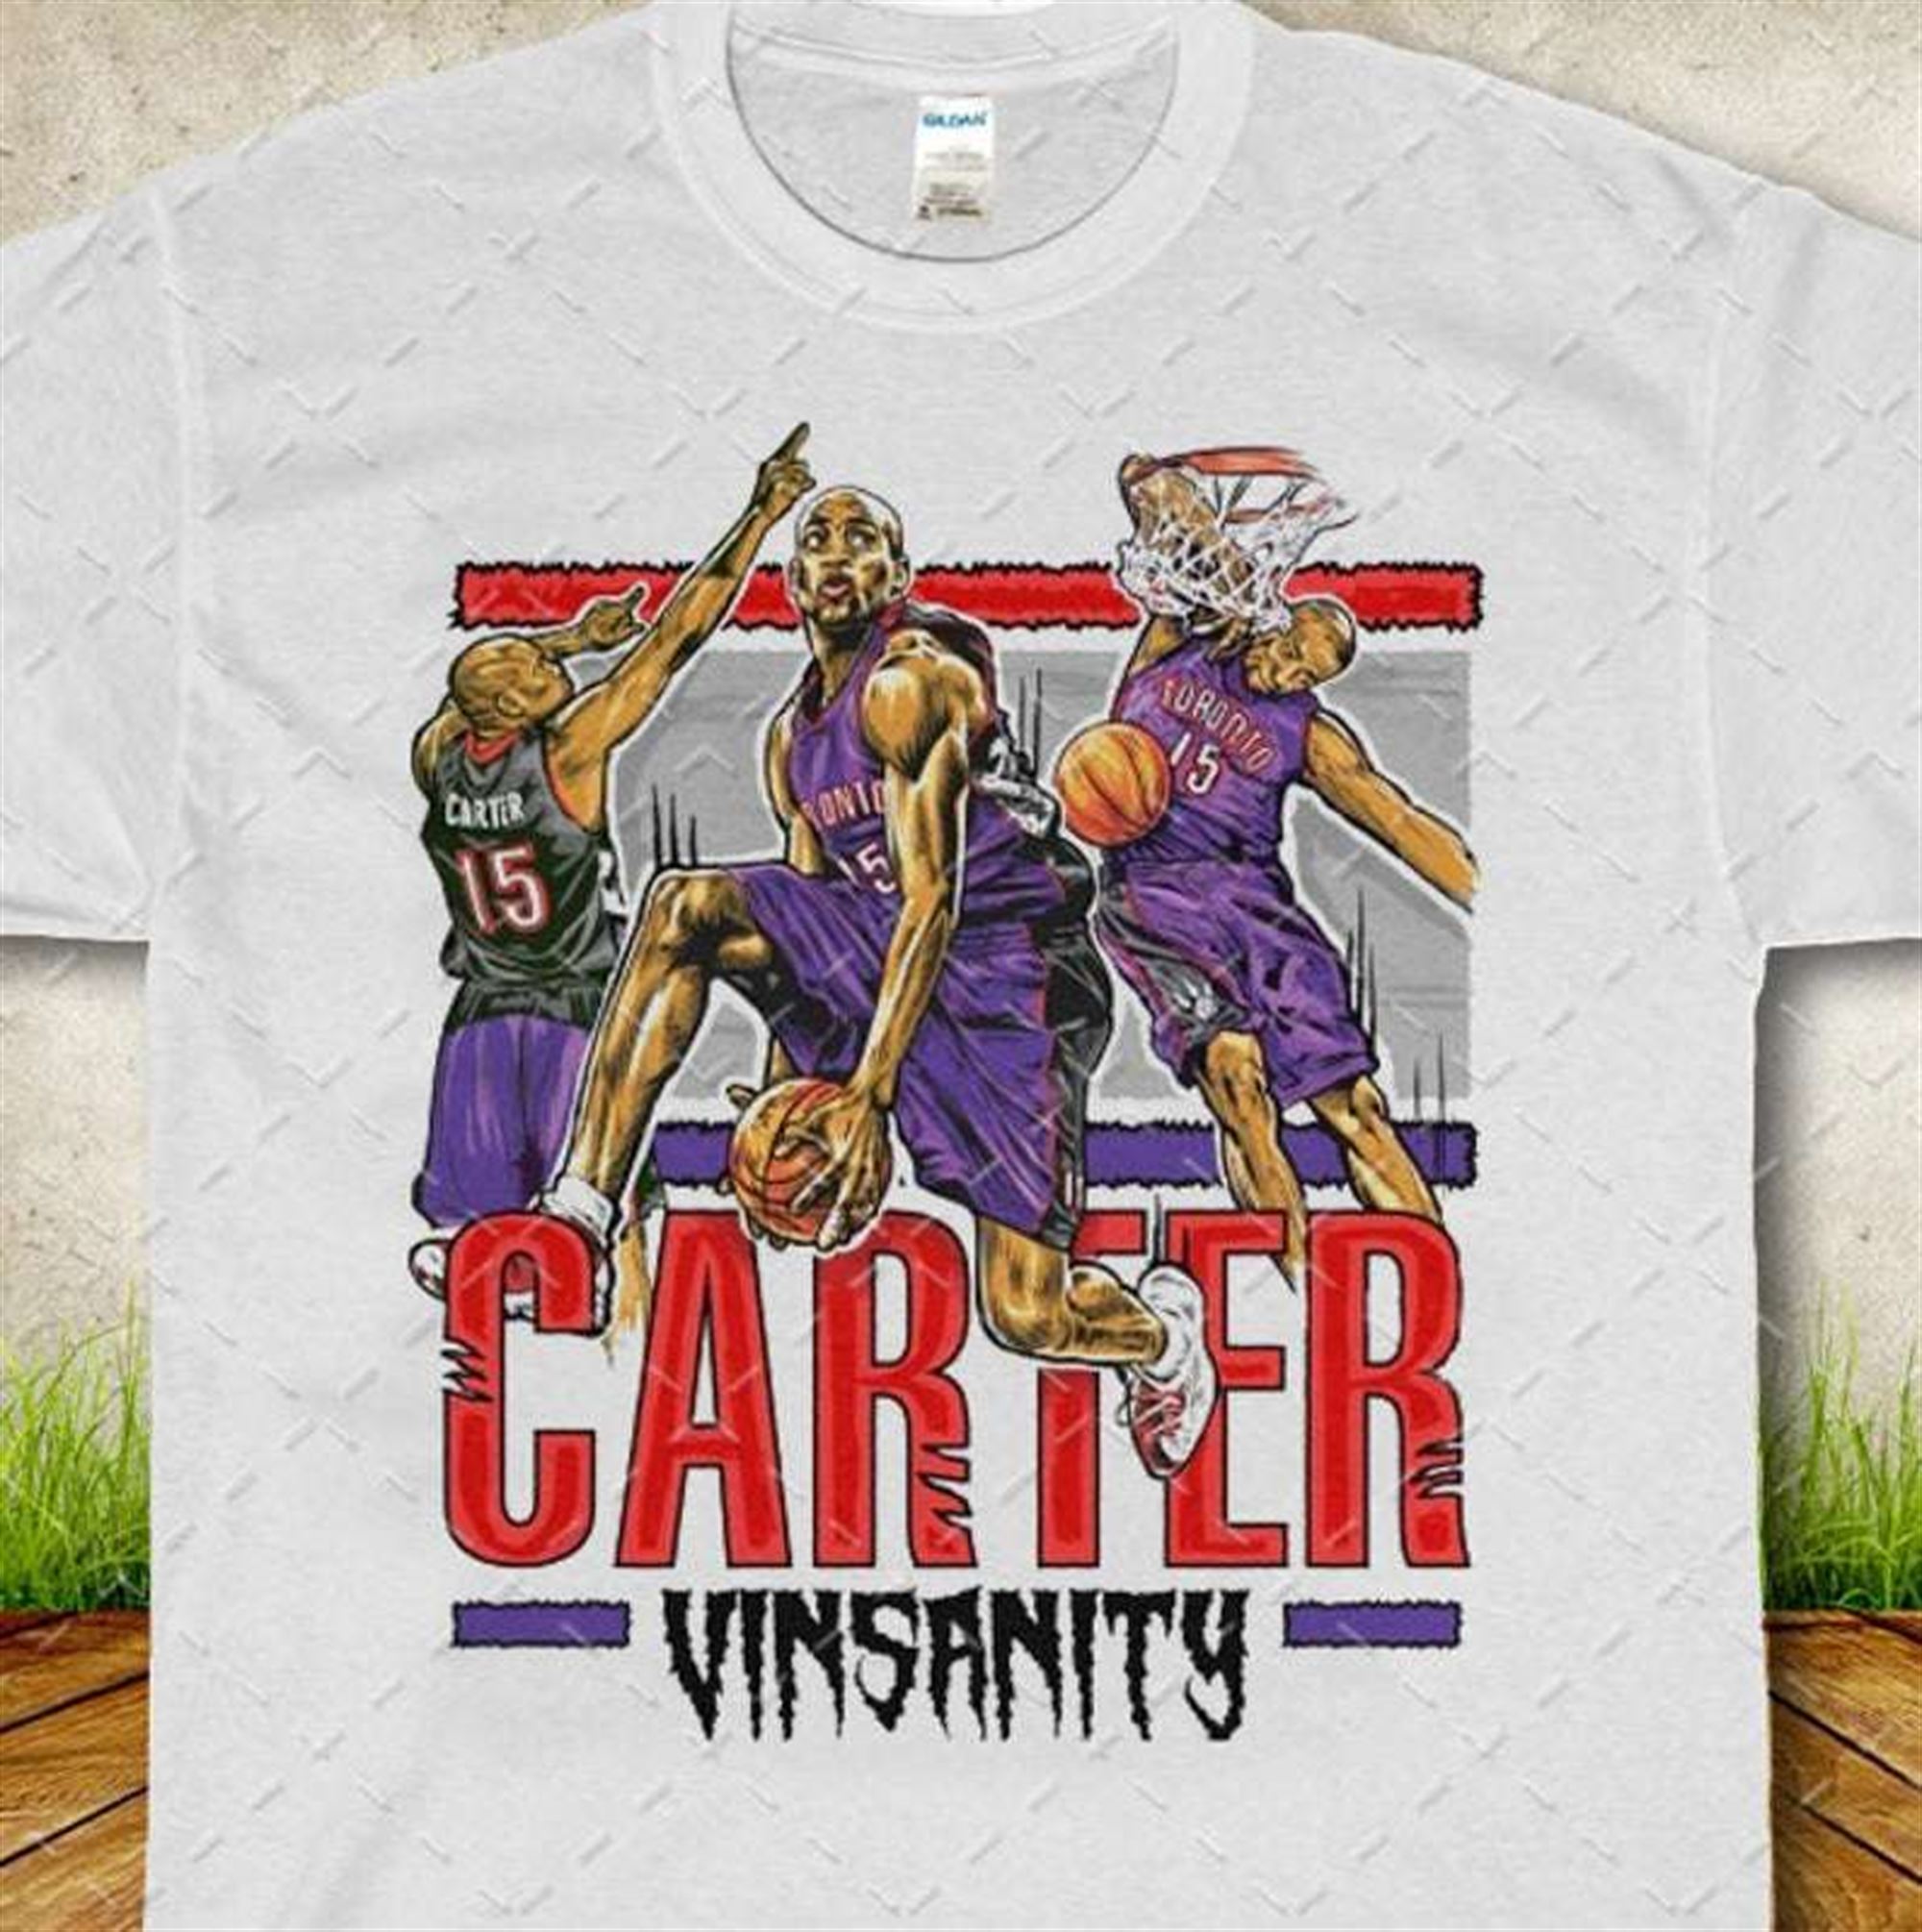 Vince Carter Nba Vinsanity Dunk Contest T Shirt Size Up To 5xl